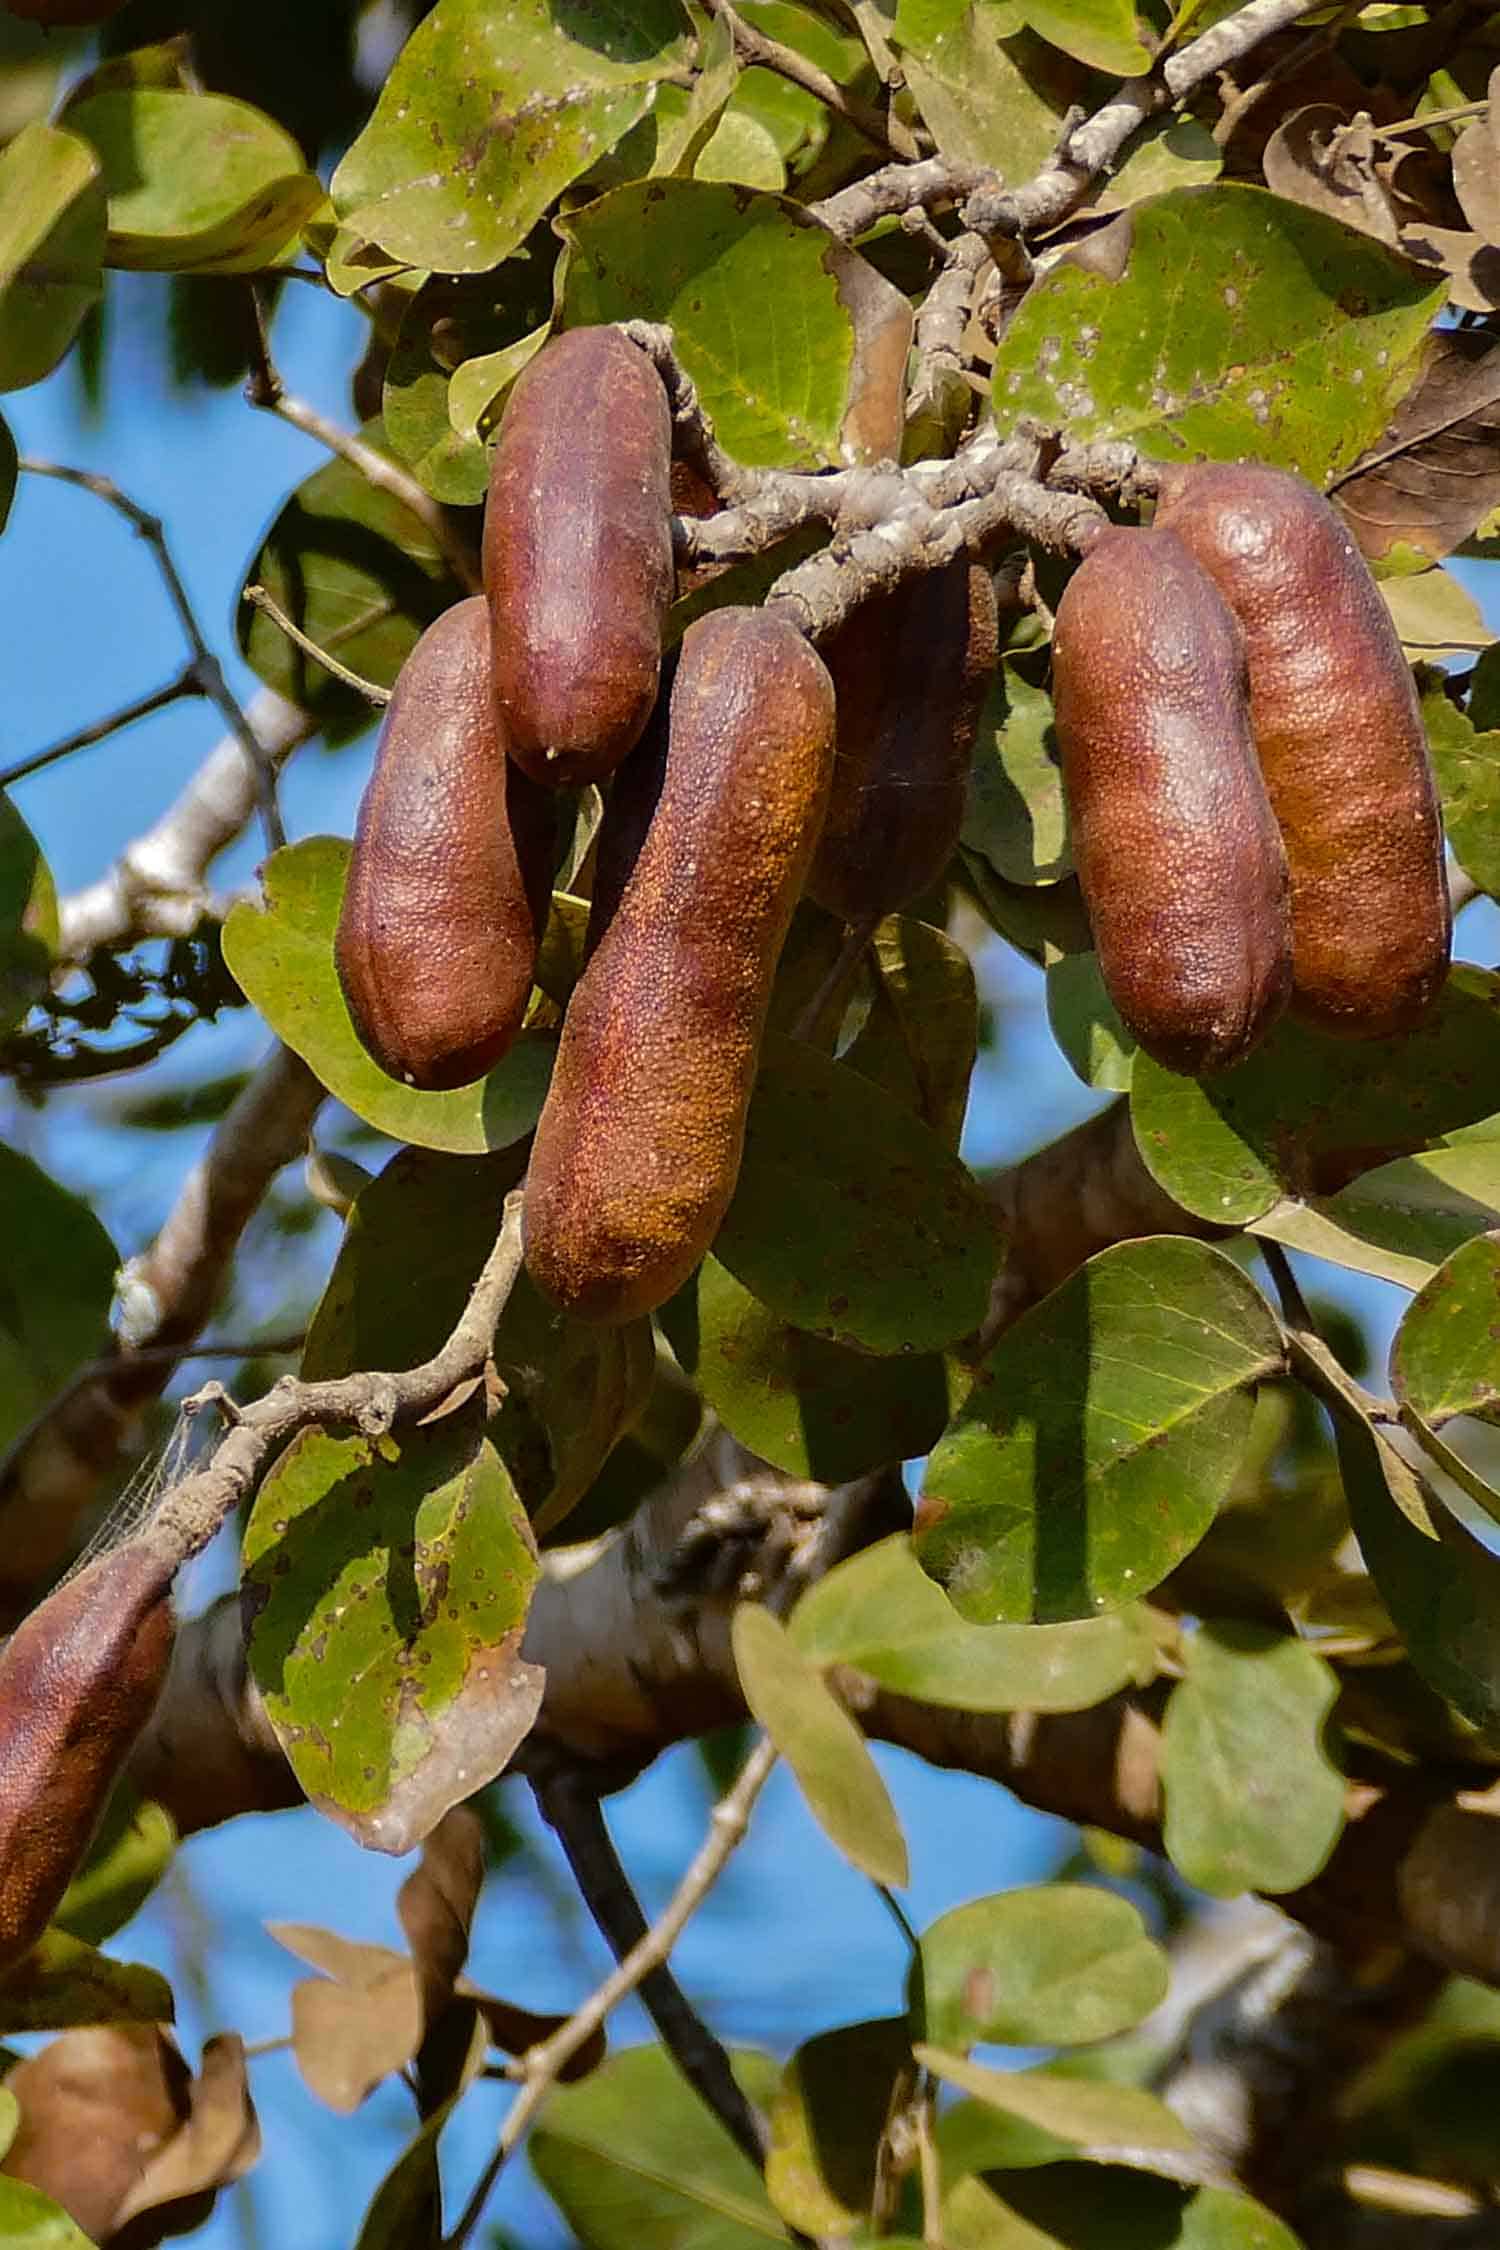 Jamaic fruit called stinking toe, or locust fruit. They are in a tree and the pods look like thick toes.